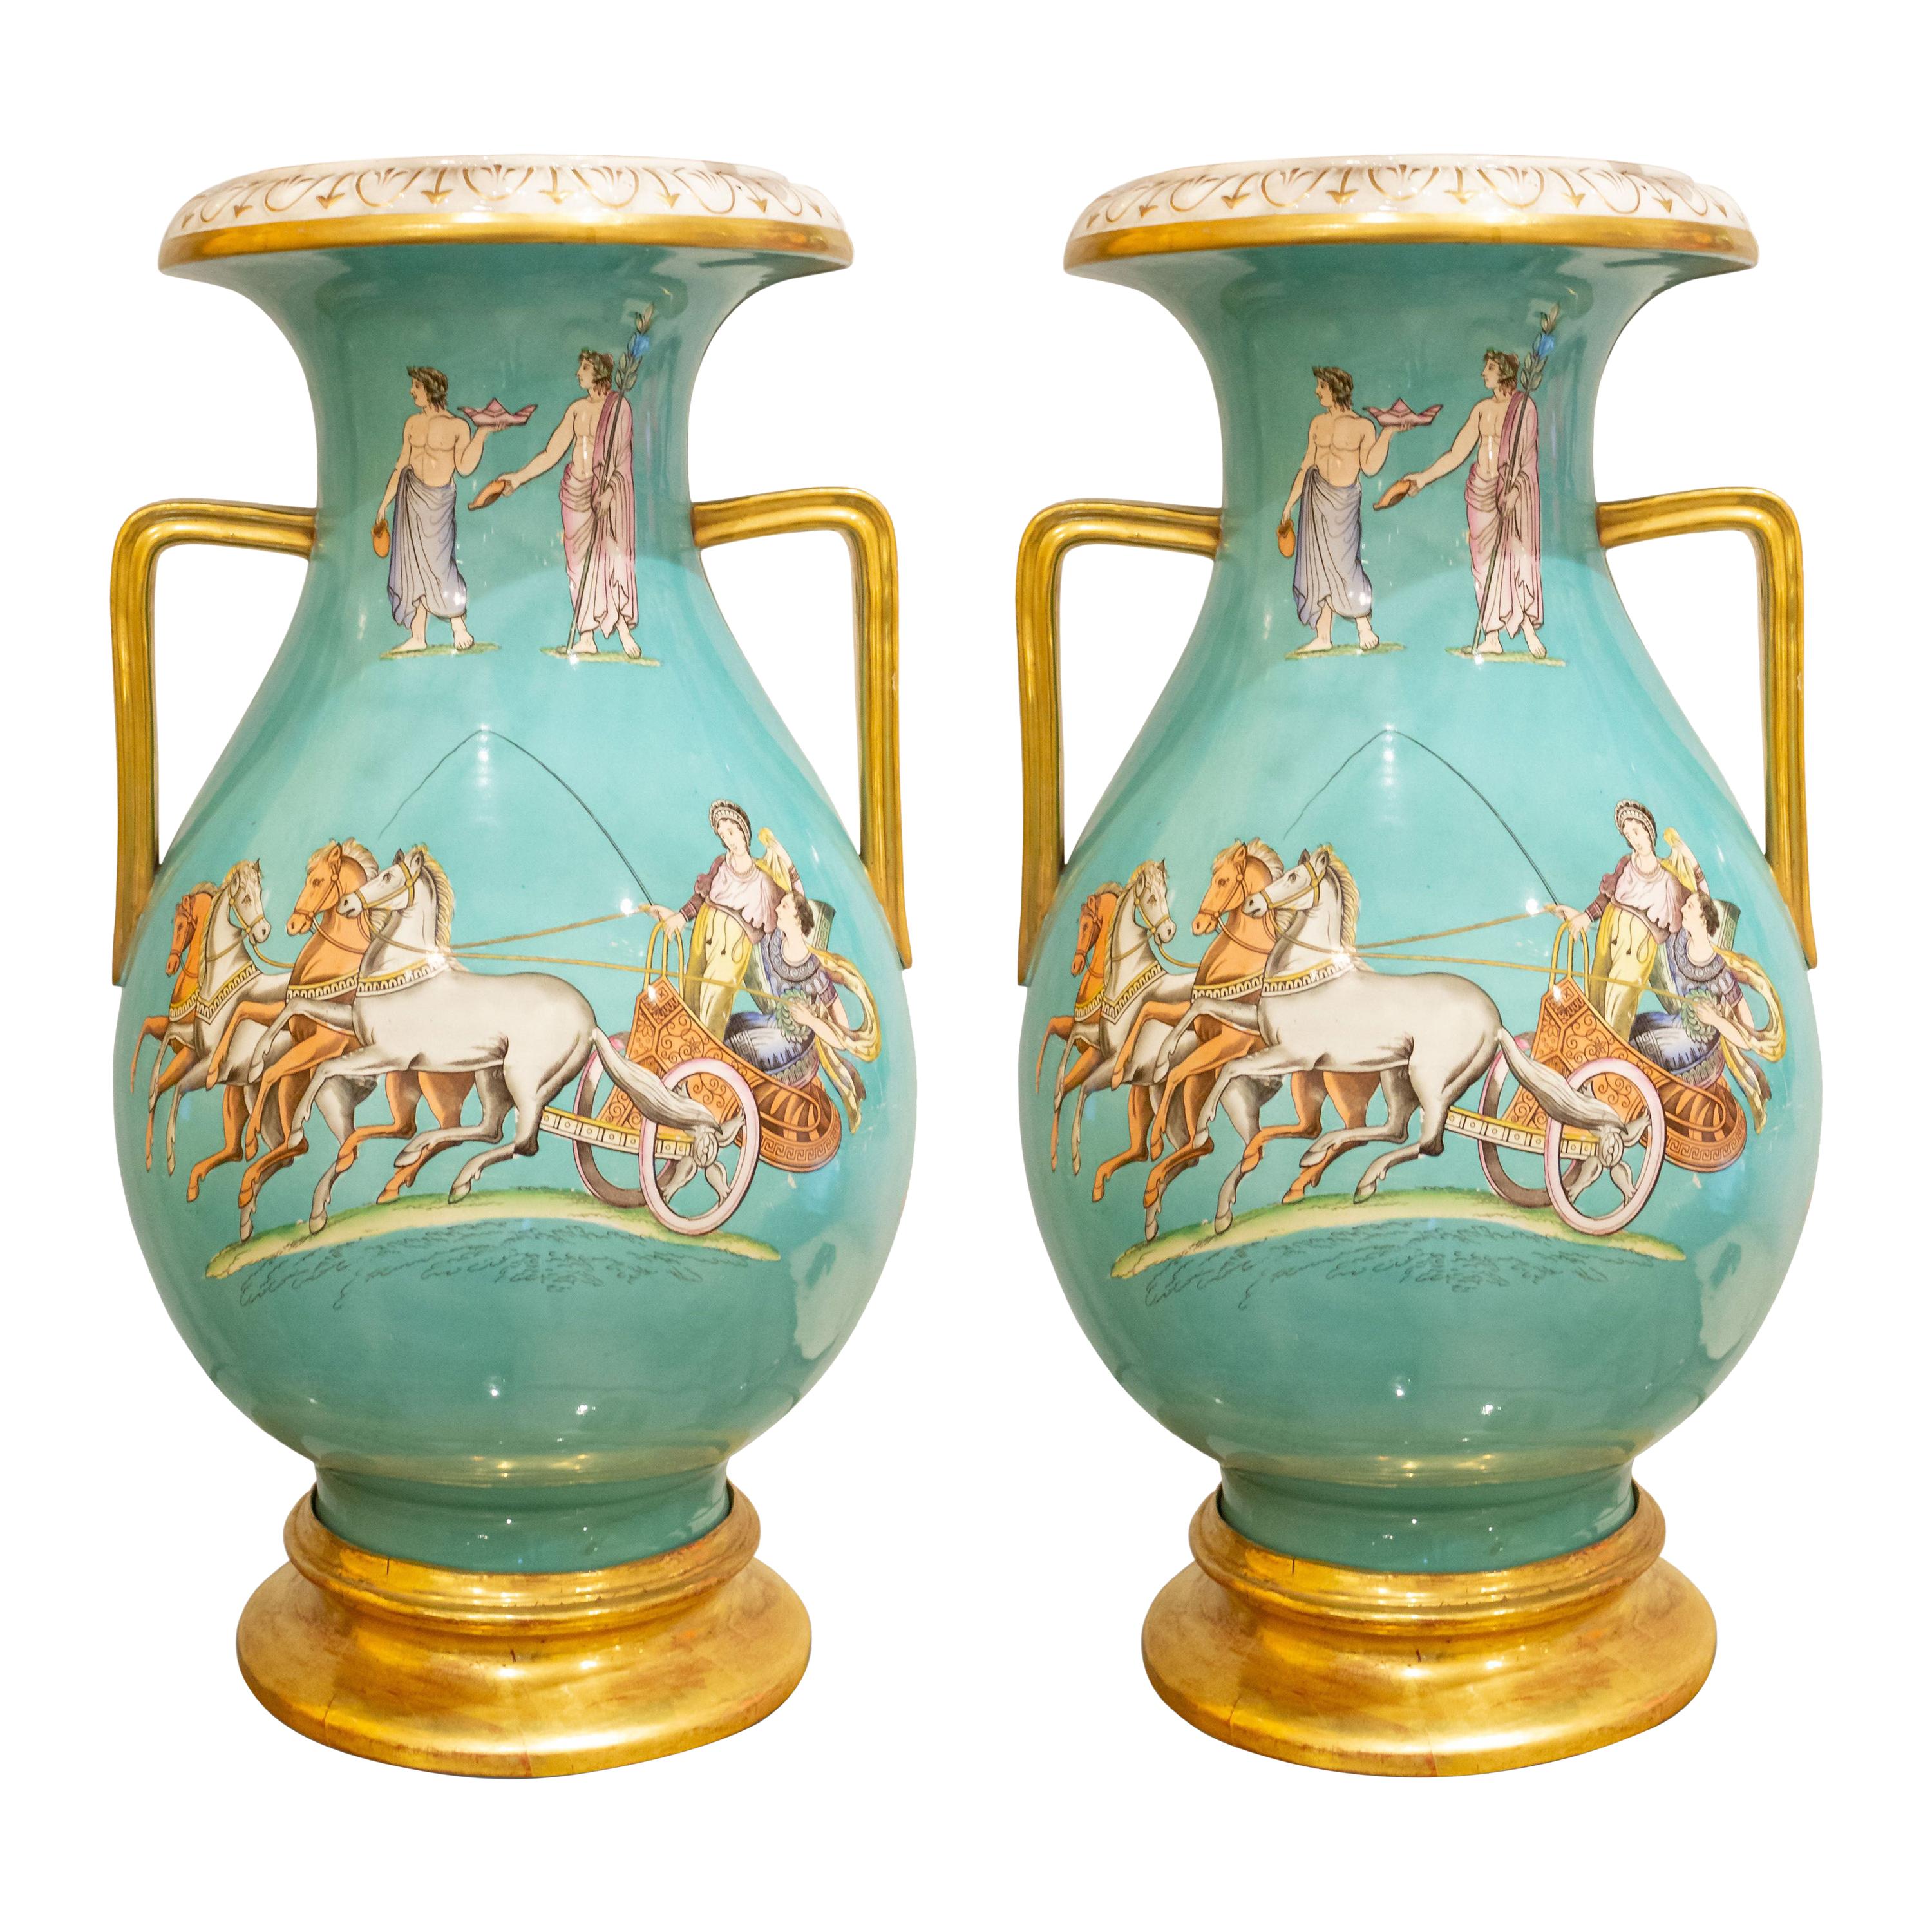 Pair of NeoClassical Grecian Style Glazed Porcelain Vases